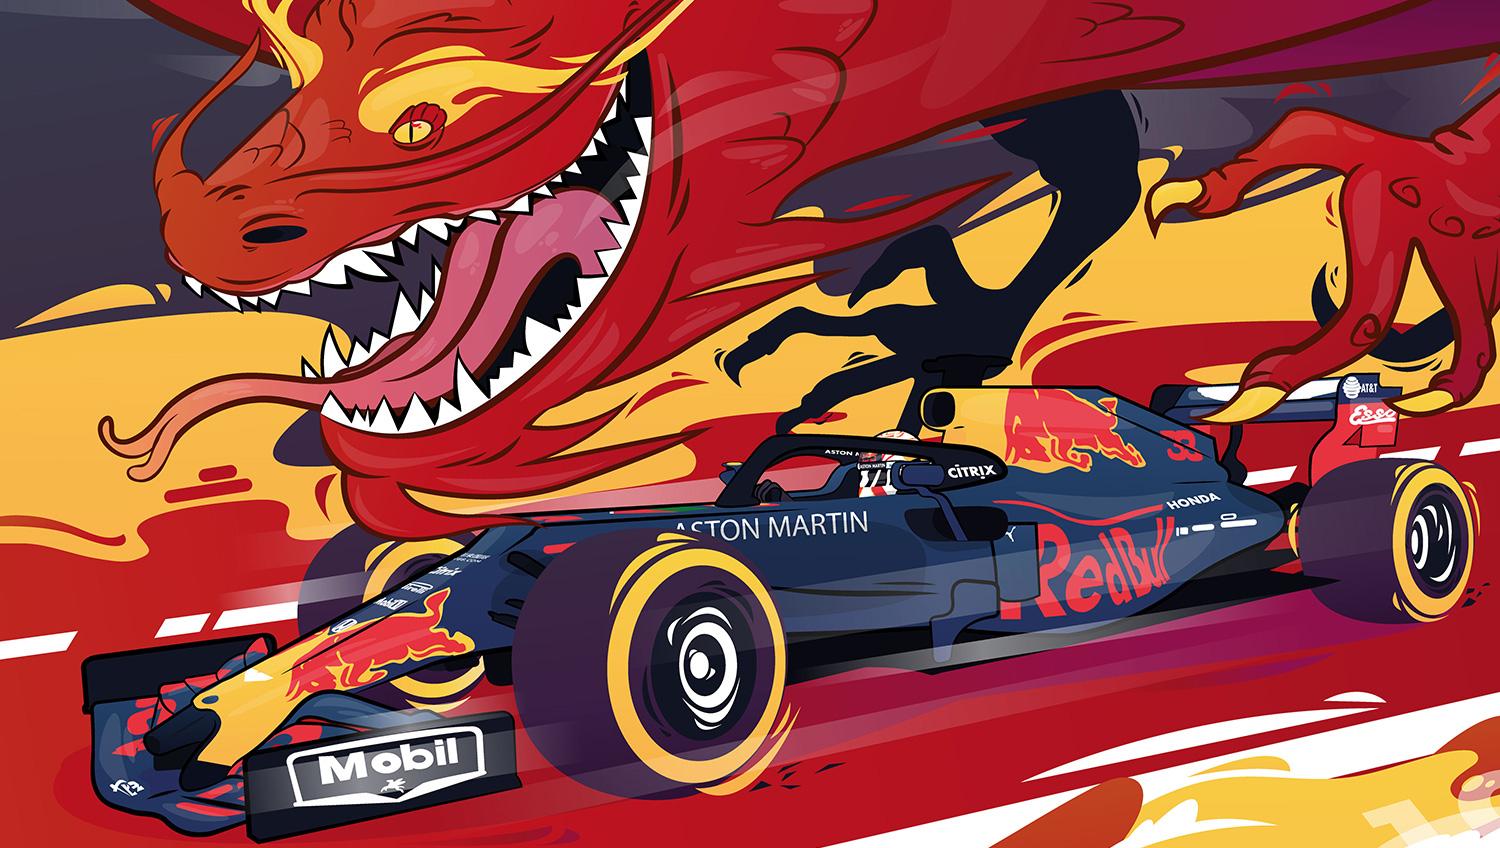 Oracle Red Bull Racing Written Into The History Books Race1000 Bring On The Next Chapter F1 T Co Qvp9xtm9nj Twitter